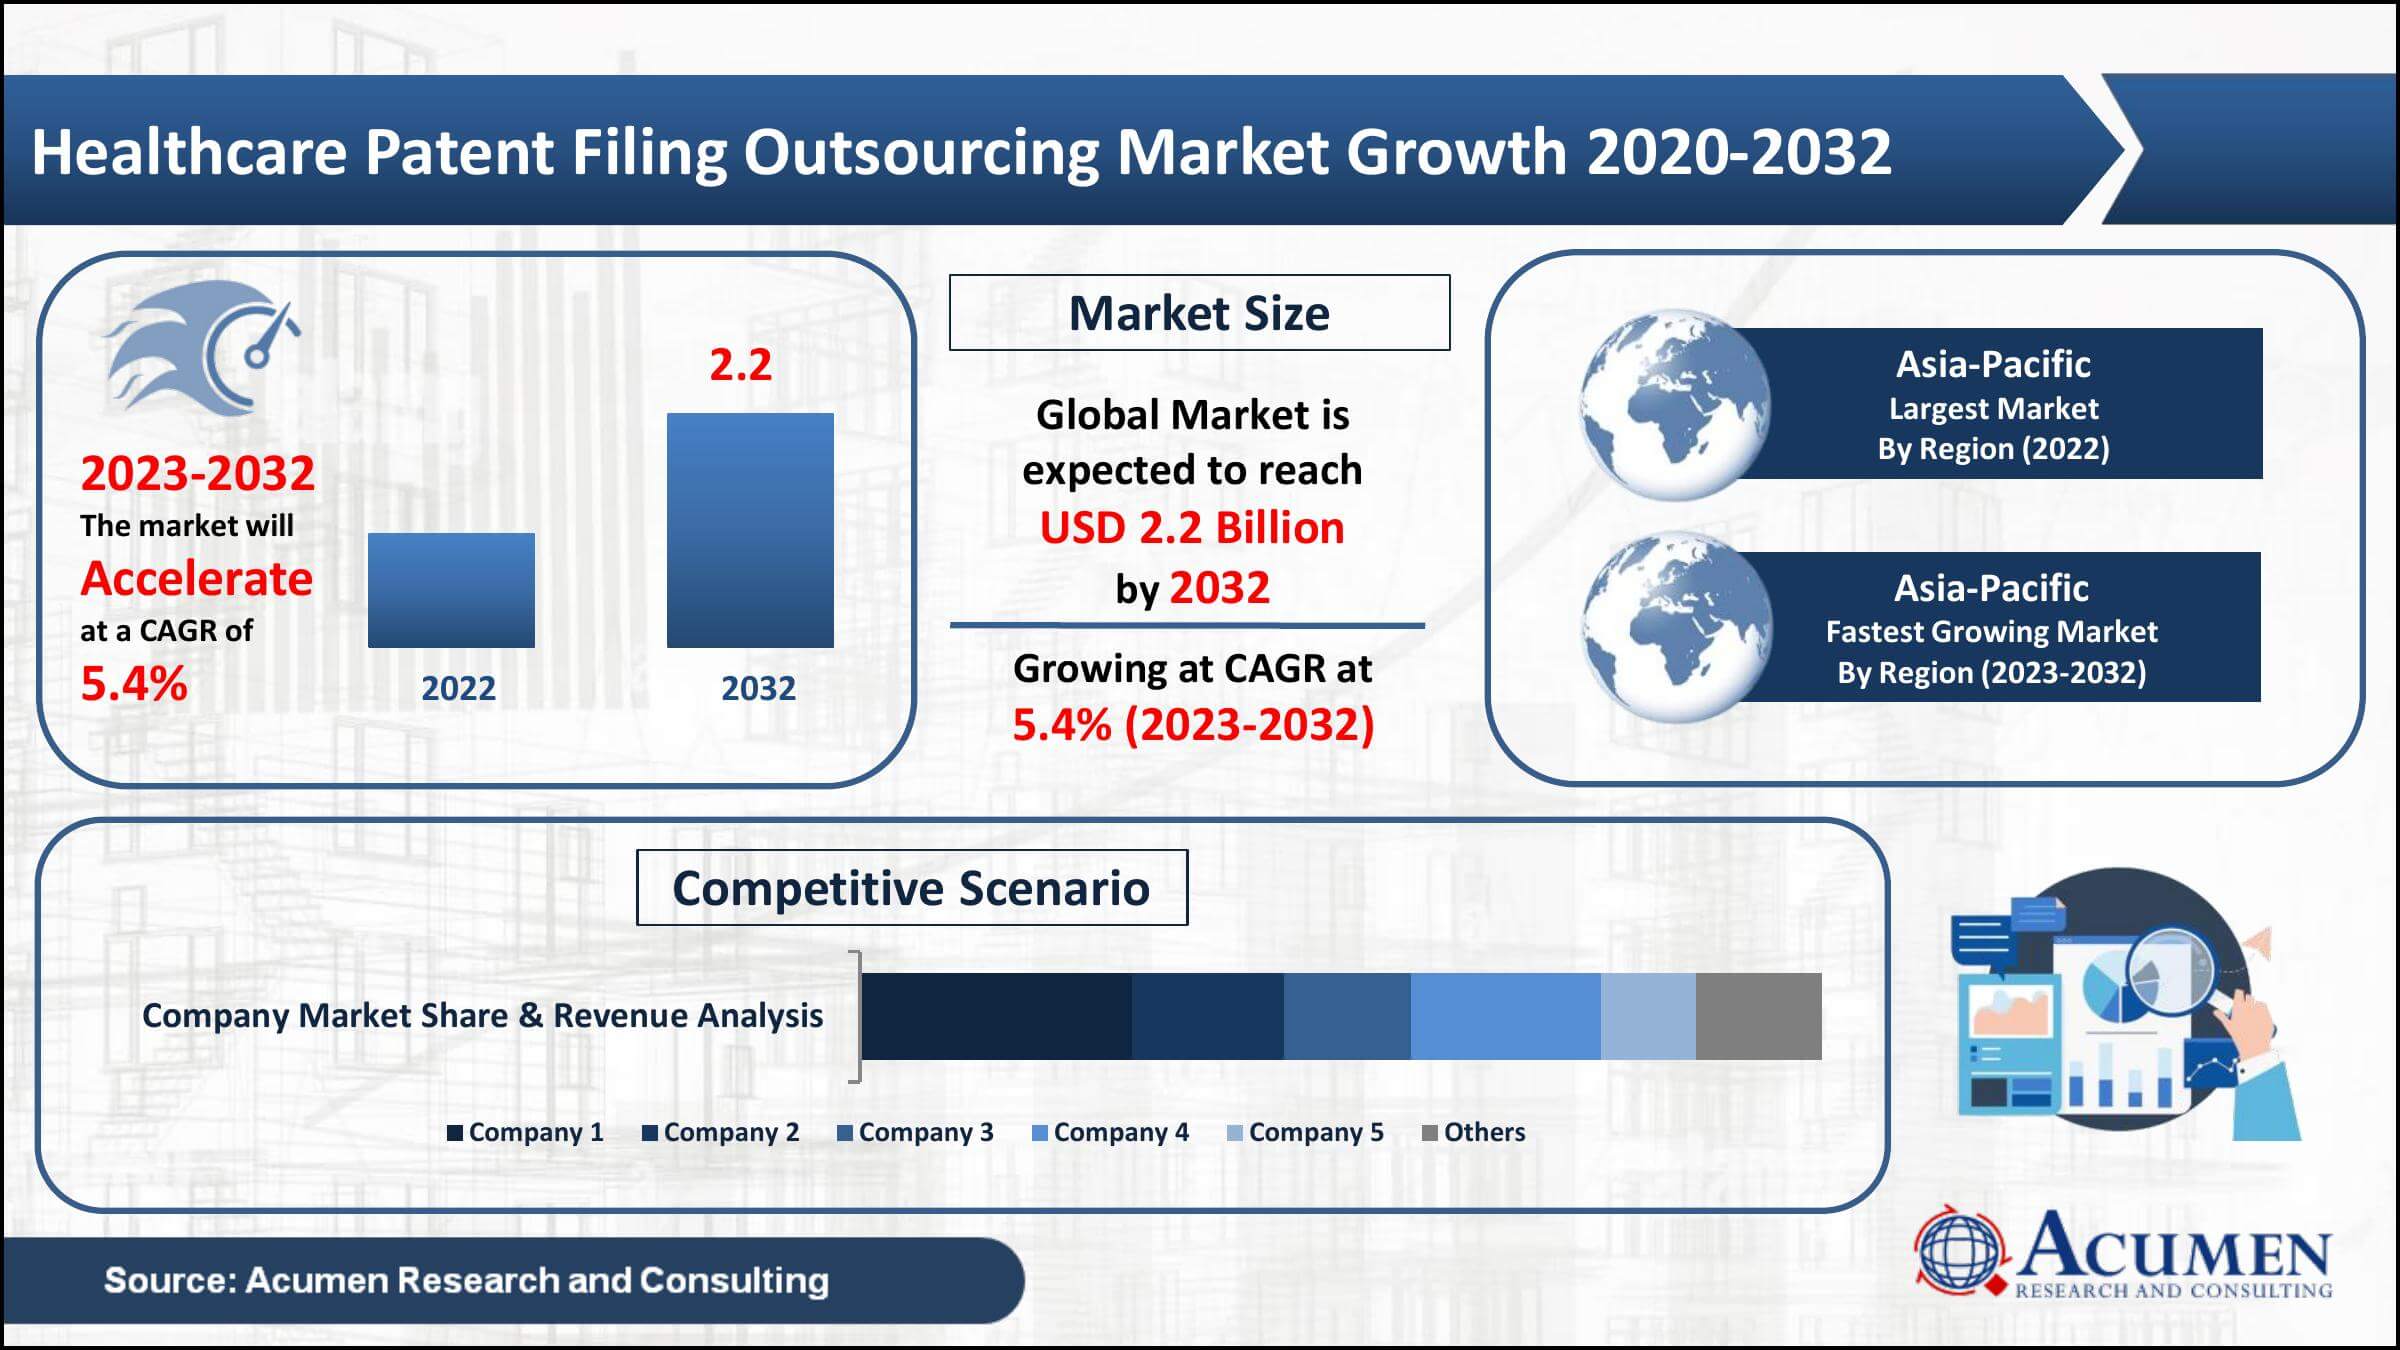 Healthcare Patent Filing Outsourcing Market Value